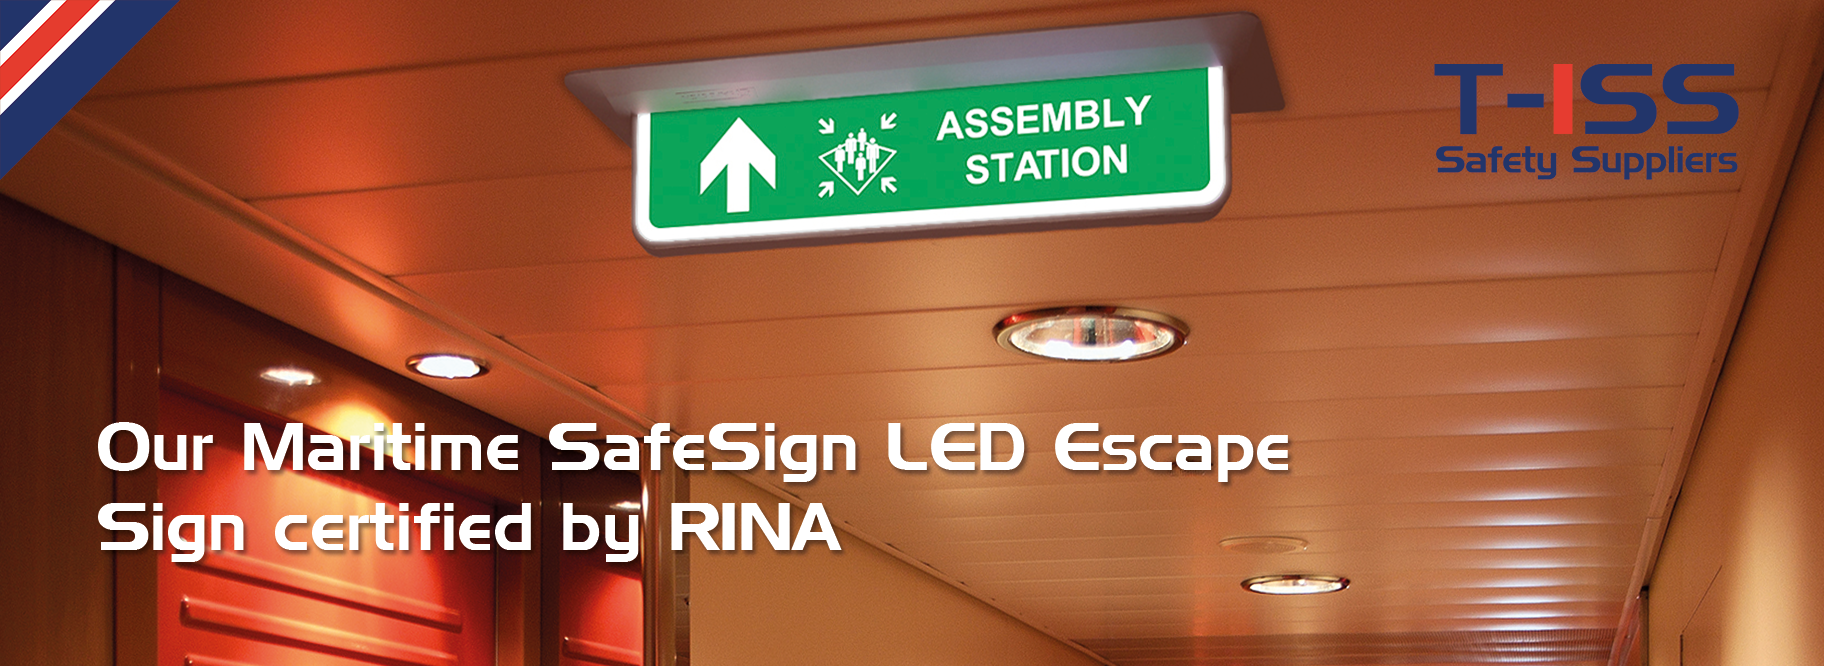 RINA Certificate Maritime SafeSign LED Escape Sign by T-ISS Safety Suppliers